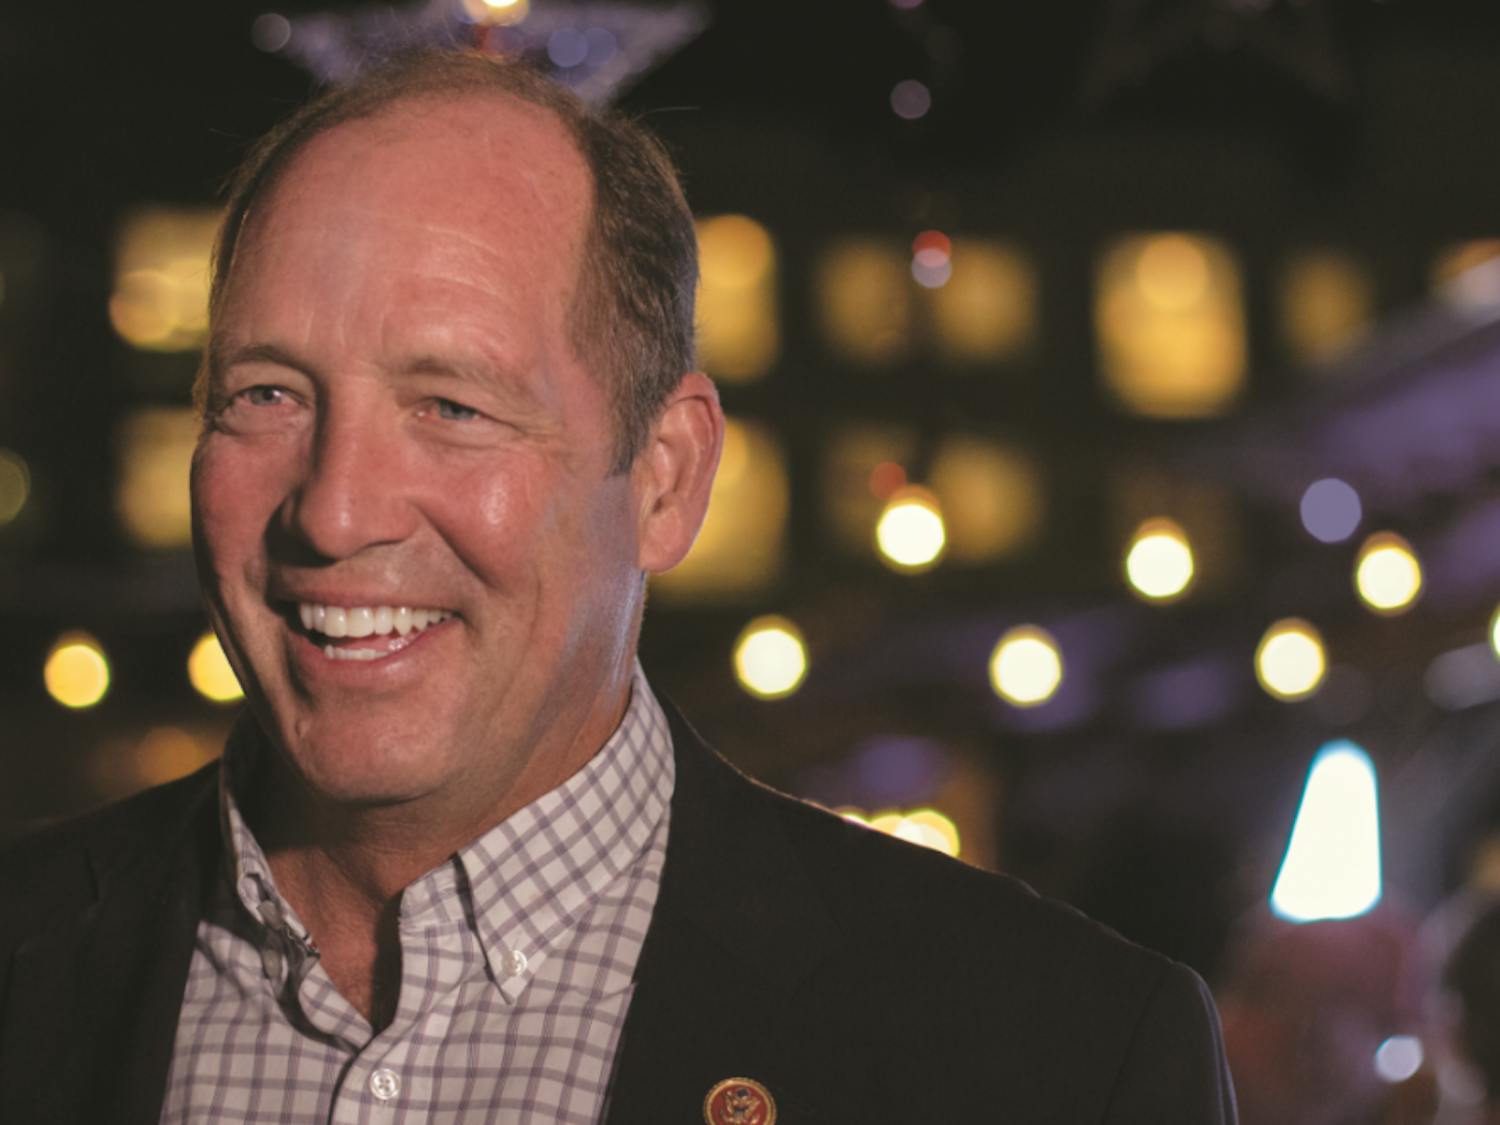 U.S. Rep. Ted Yoho smiles while he waits for the final results of Florida’s 3rd Congressional District election. “I want to see the final results, but I feel good,” Yoho said. 